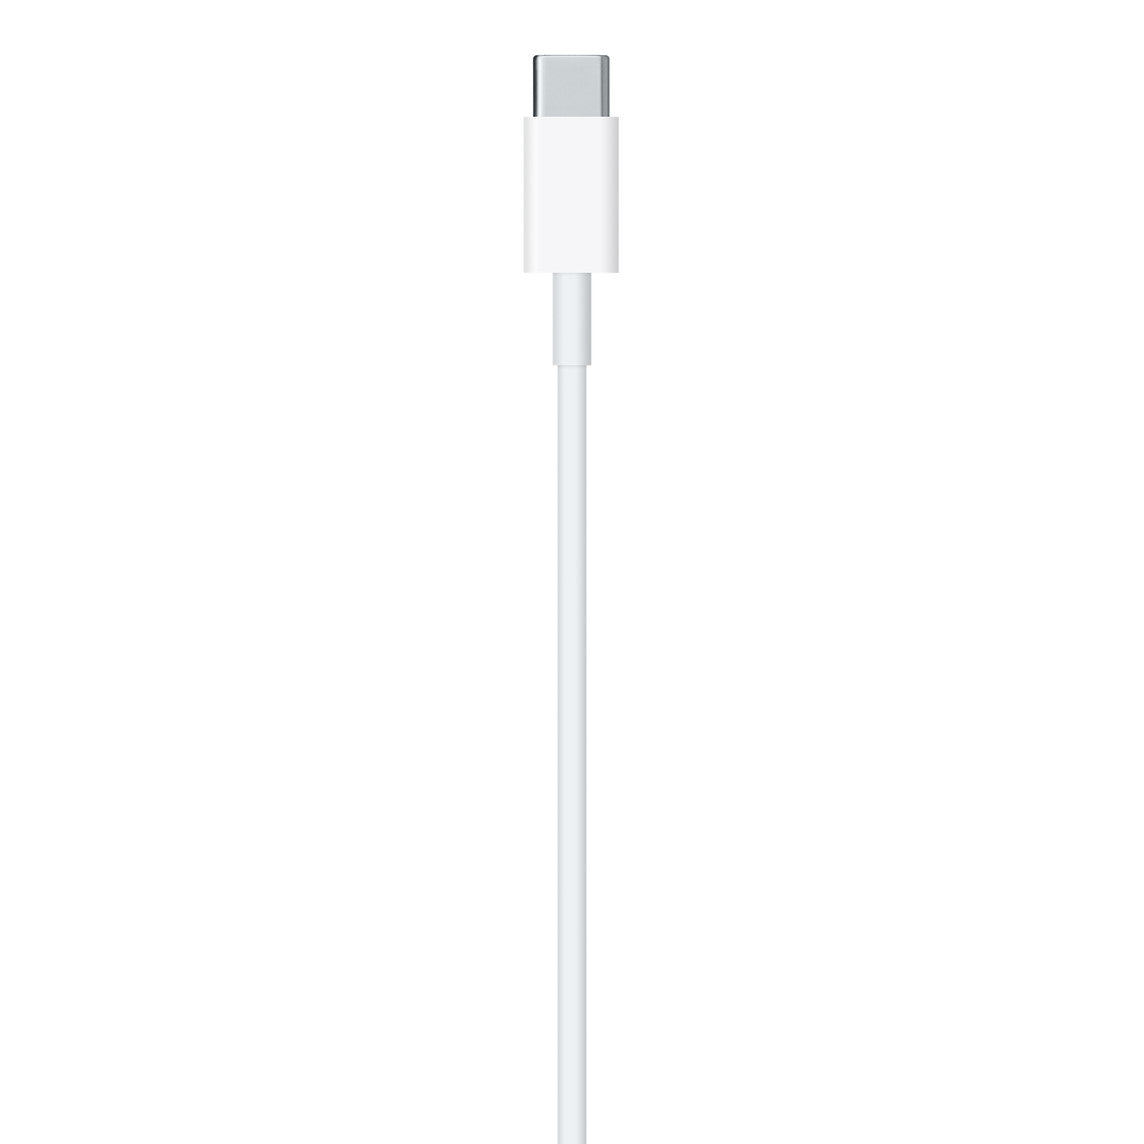 Apple MacBook 96W Charger A2166 with Apple USB-C Charge Cable